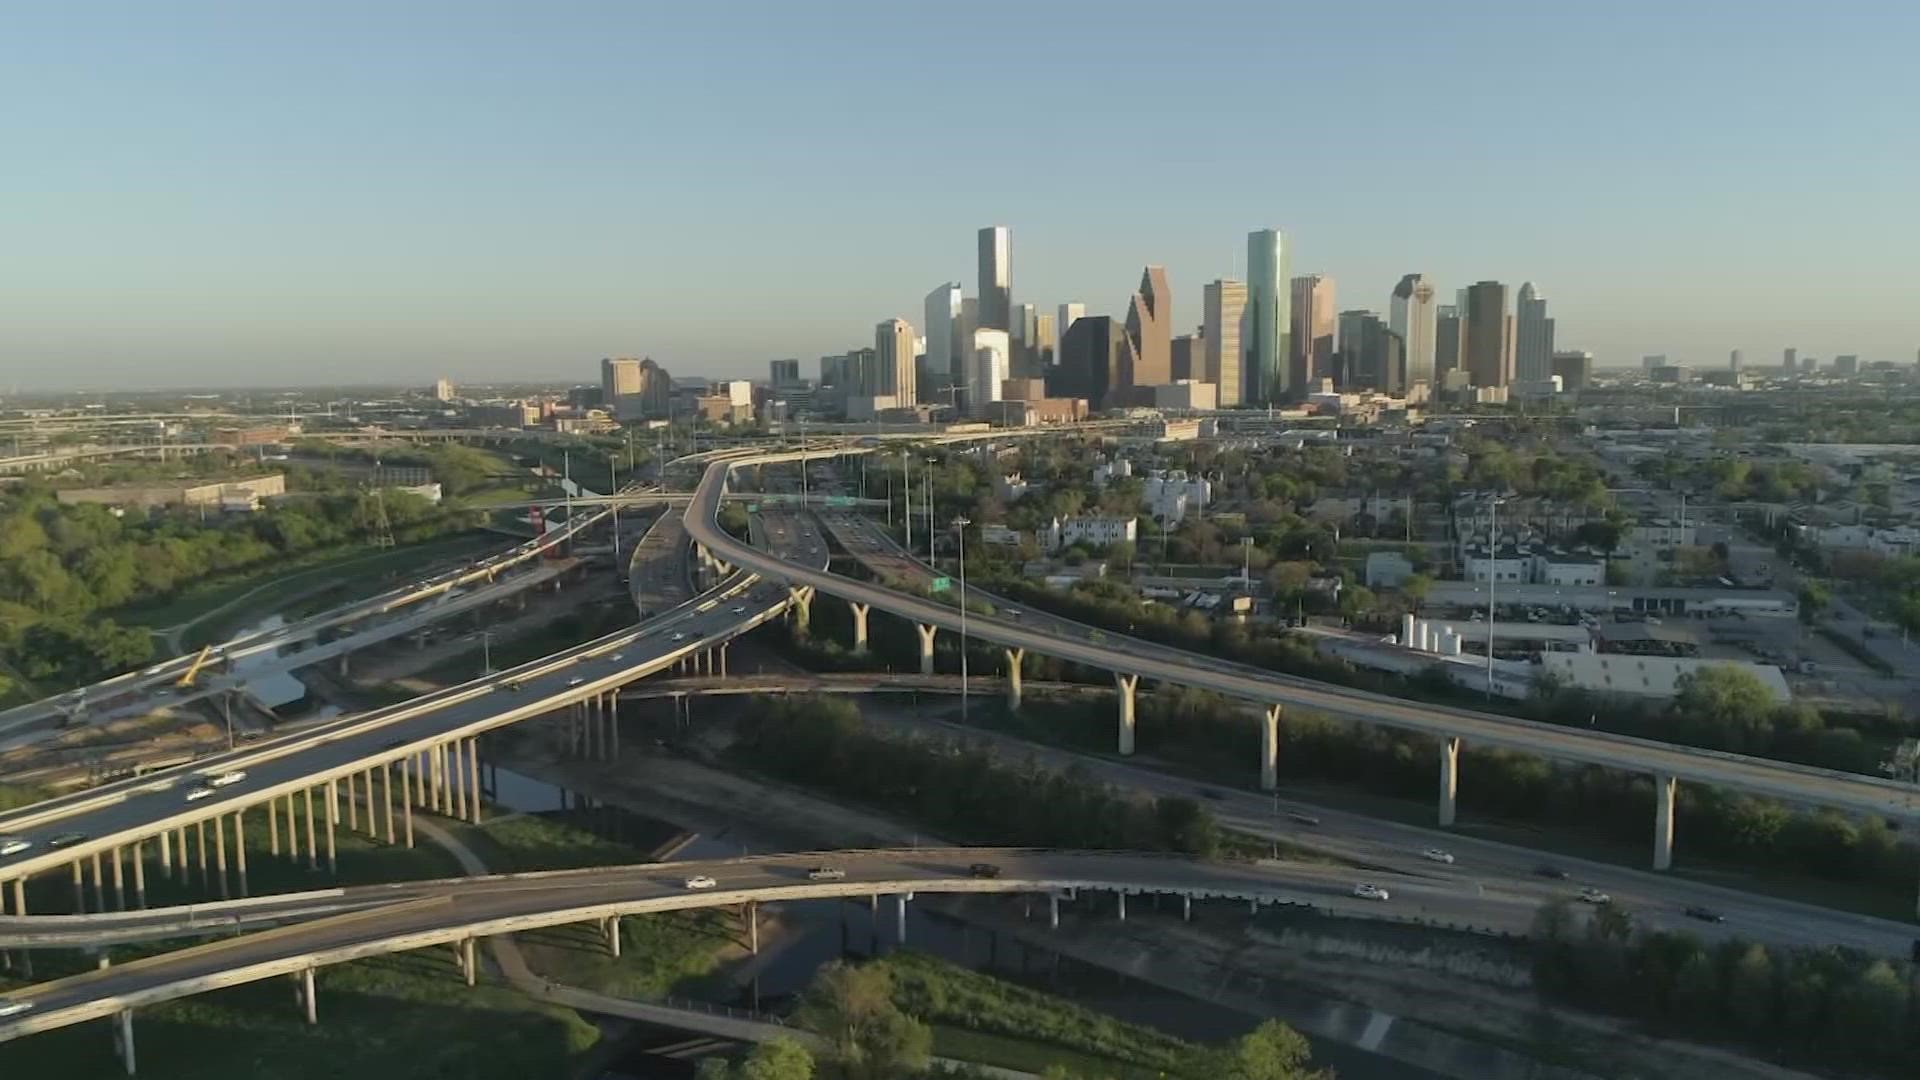 Californians are moving to Texas - but is it true? Let's take a look at the numbers!